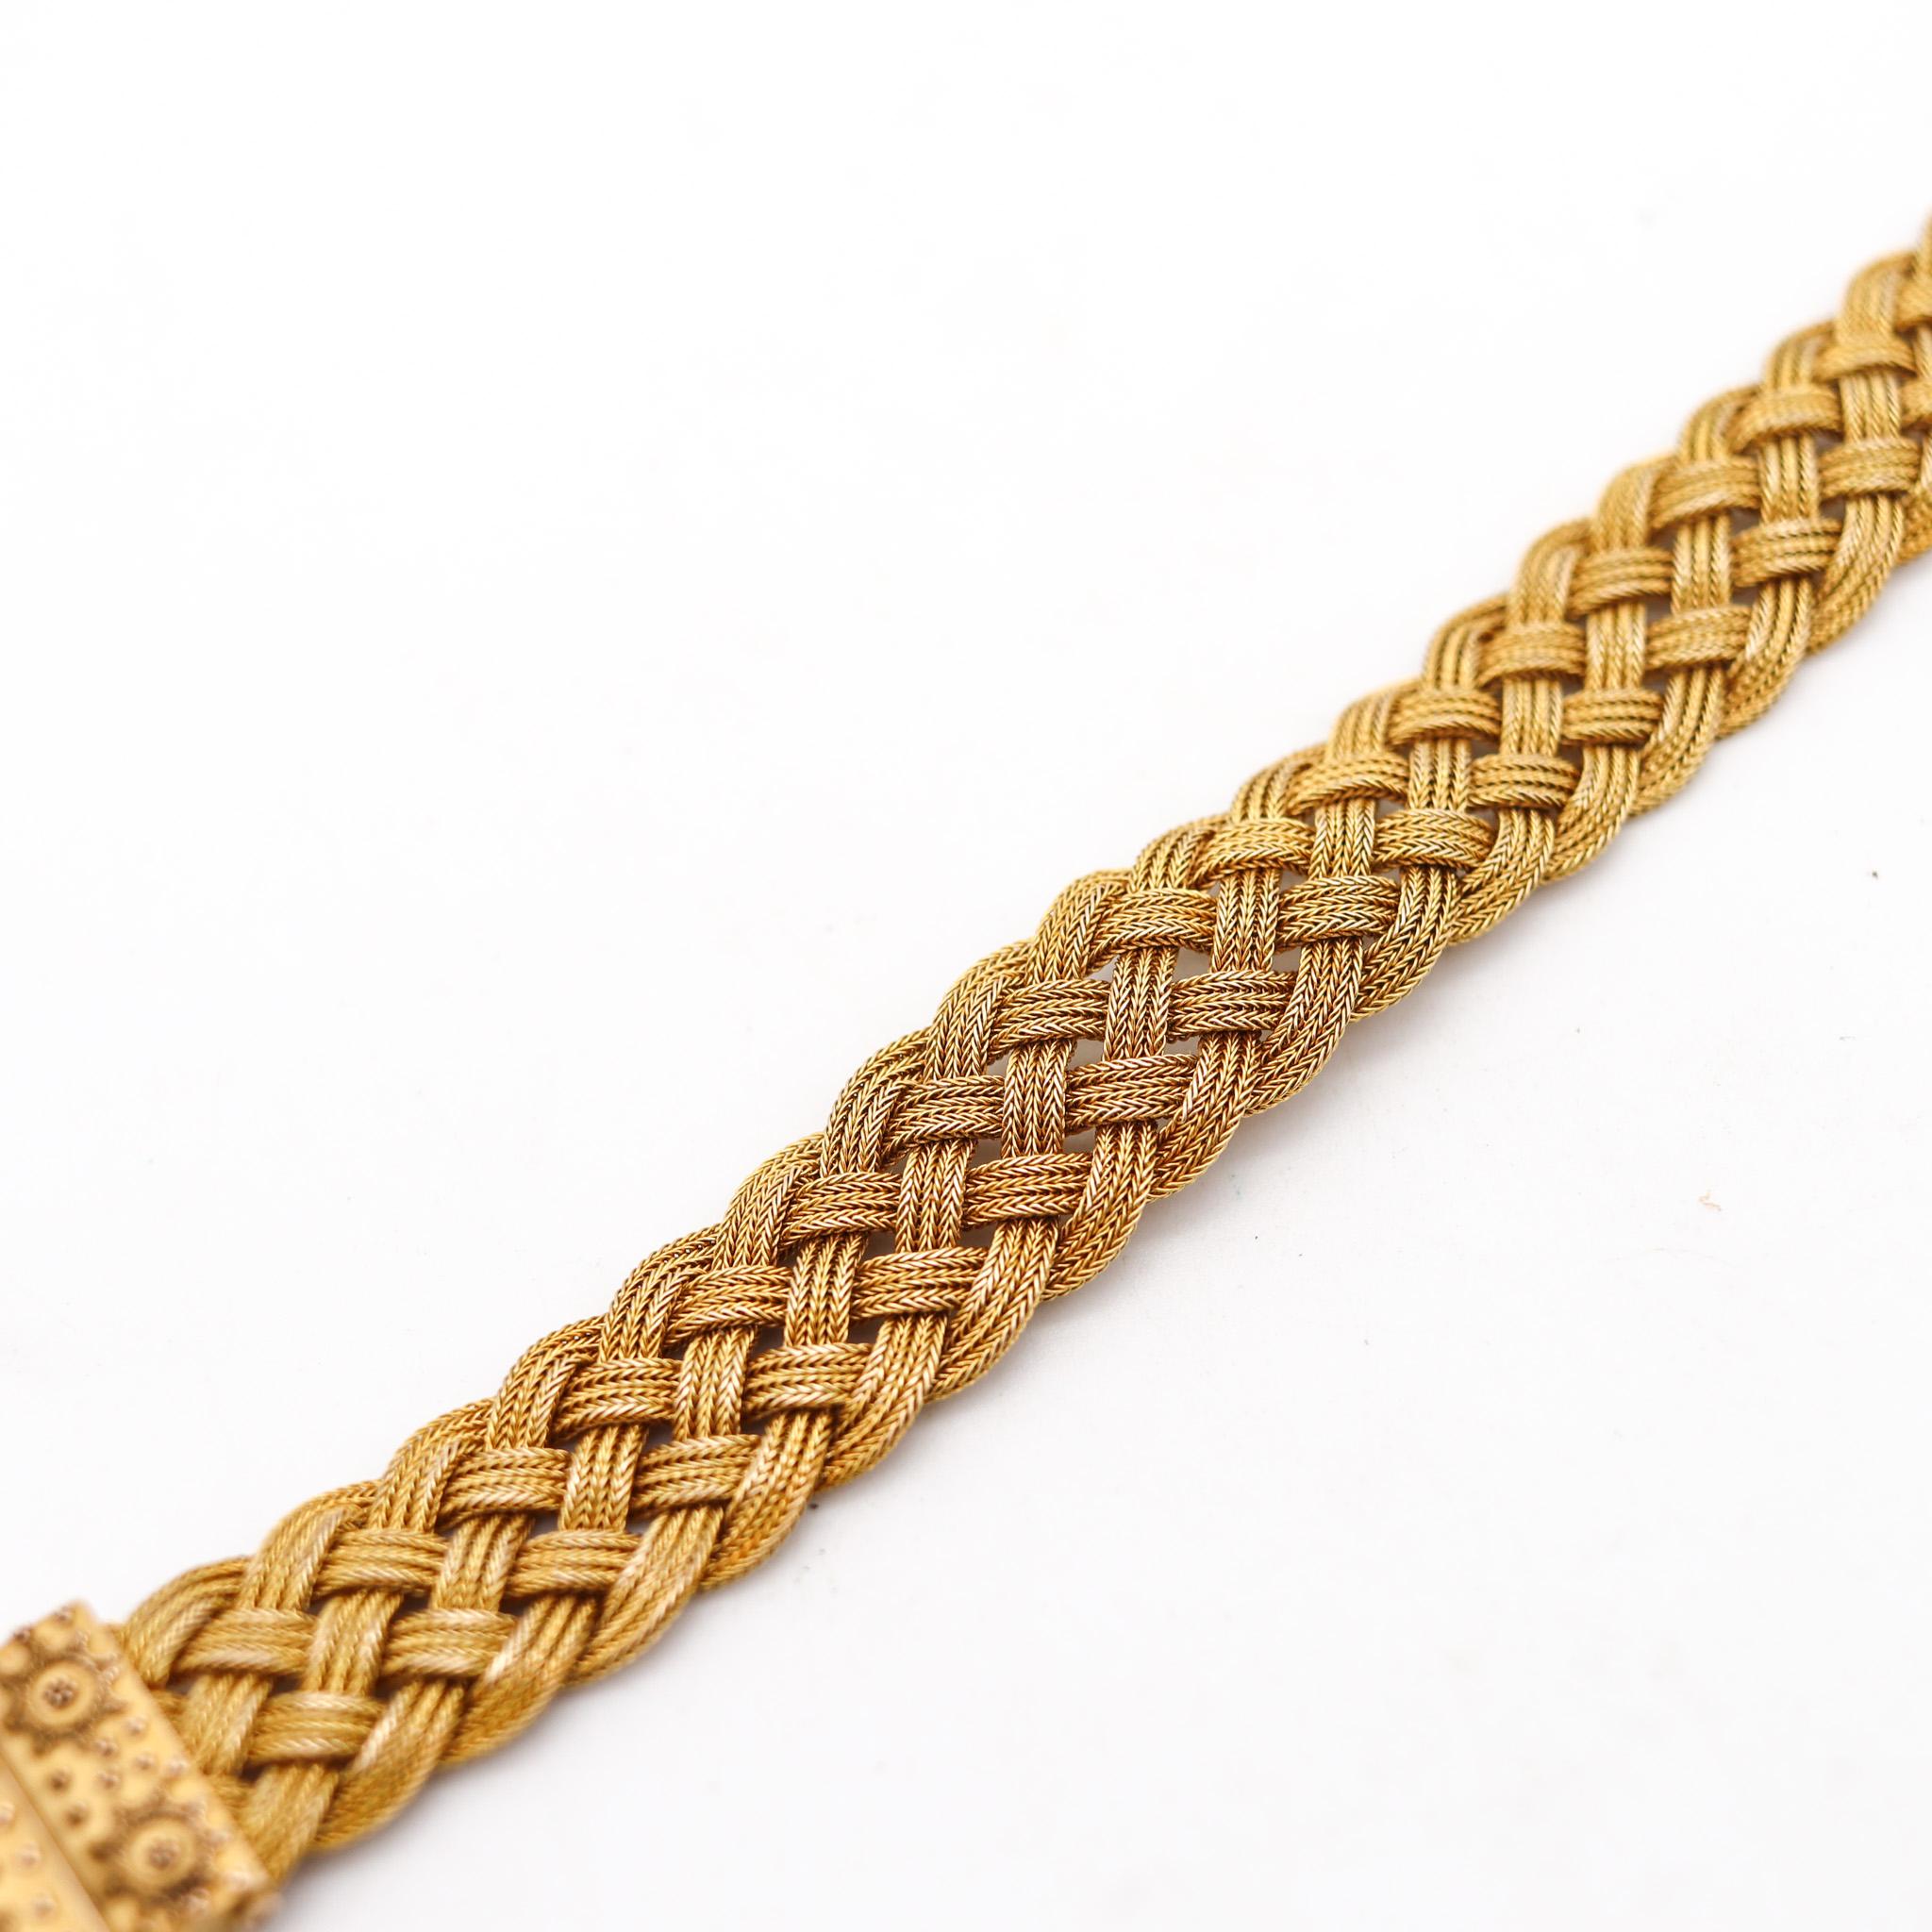 England 1860 Victorian Etruscan Revival Woven Bracelet In 14Kt Yellow Gold In Excellent Condition For Sale In Miami, FL